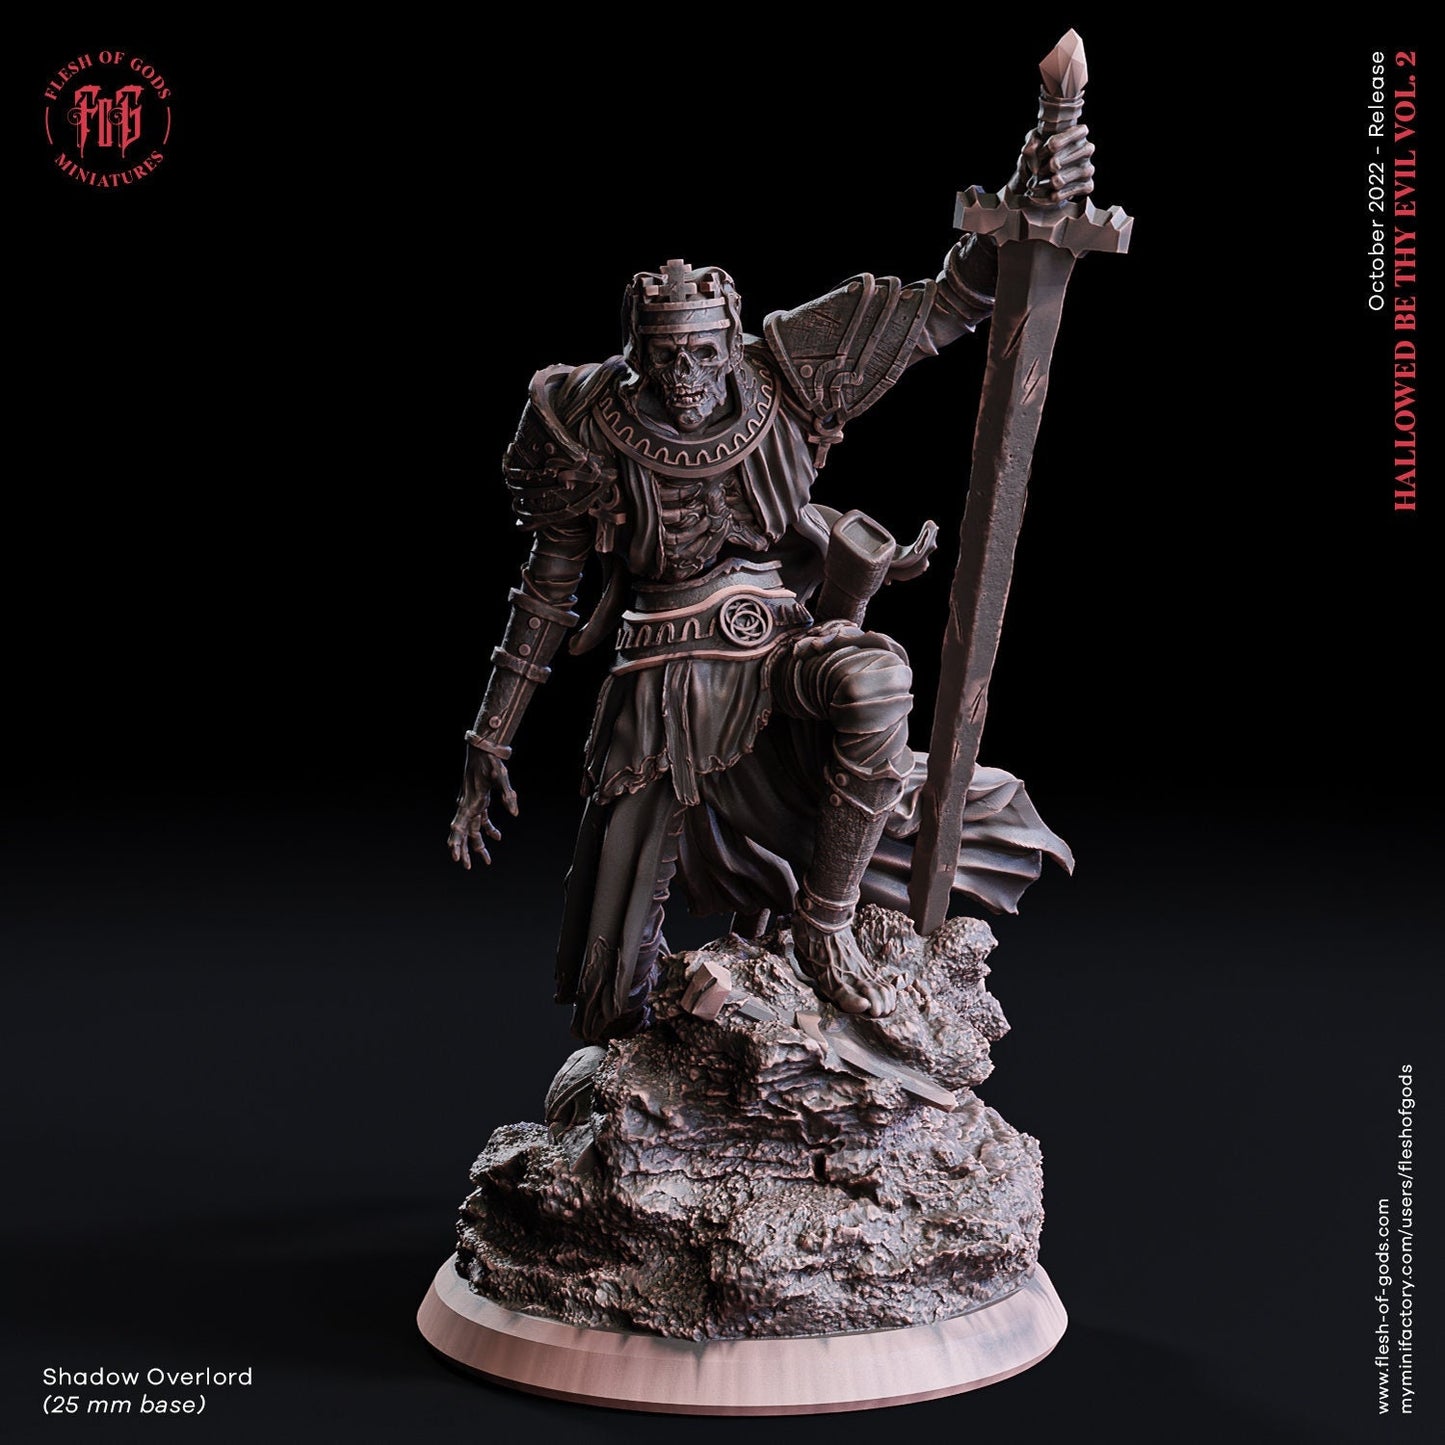 Shadow Overlord | Flesh of Gods | Enemy | 3D Printed Resin Miniature | Dungeons and Dragons | Pathfinder | Tabletop Role Playing | D&D